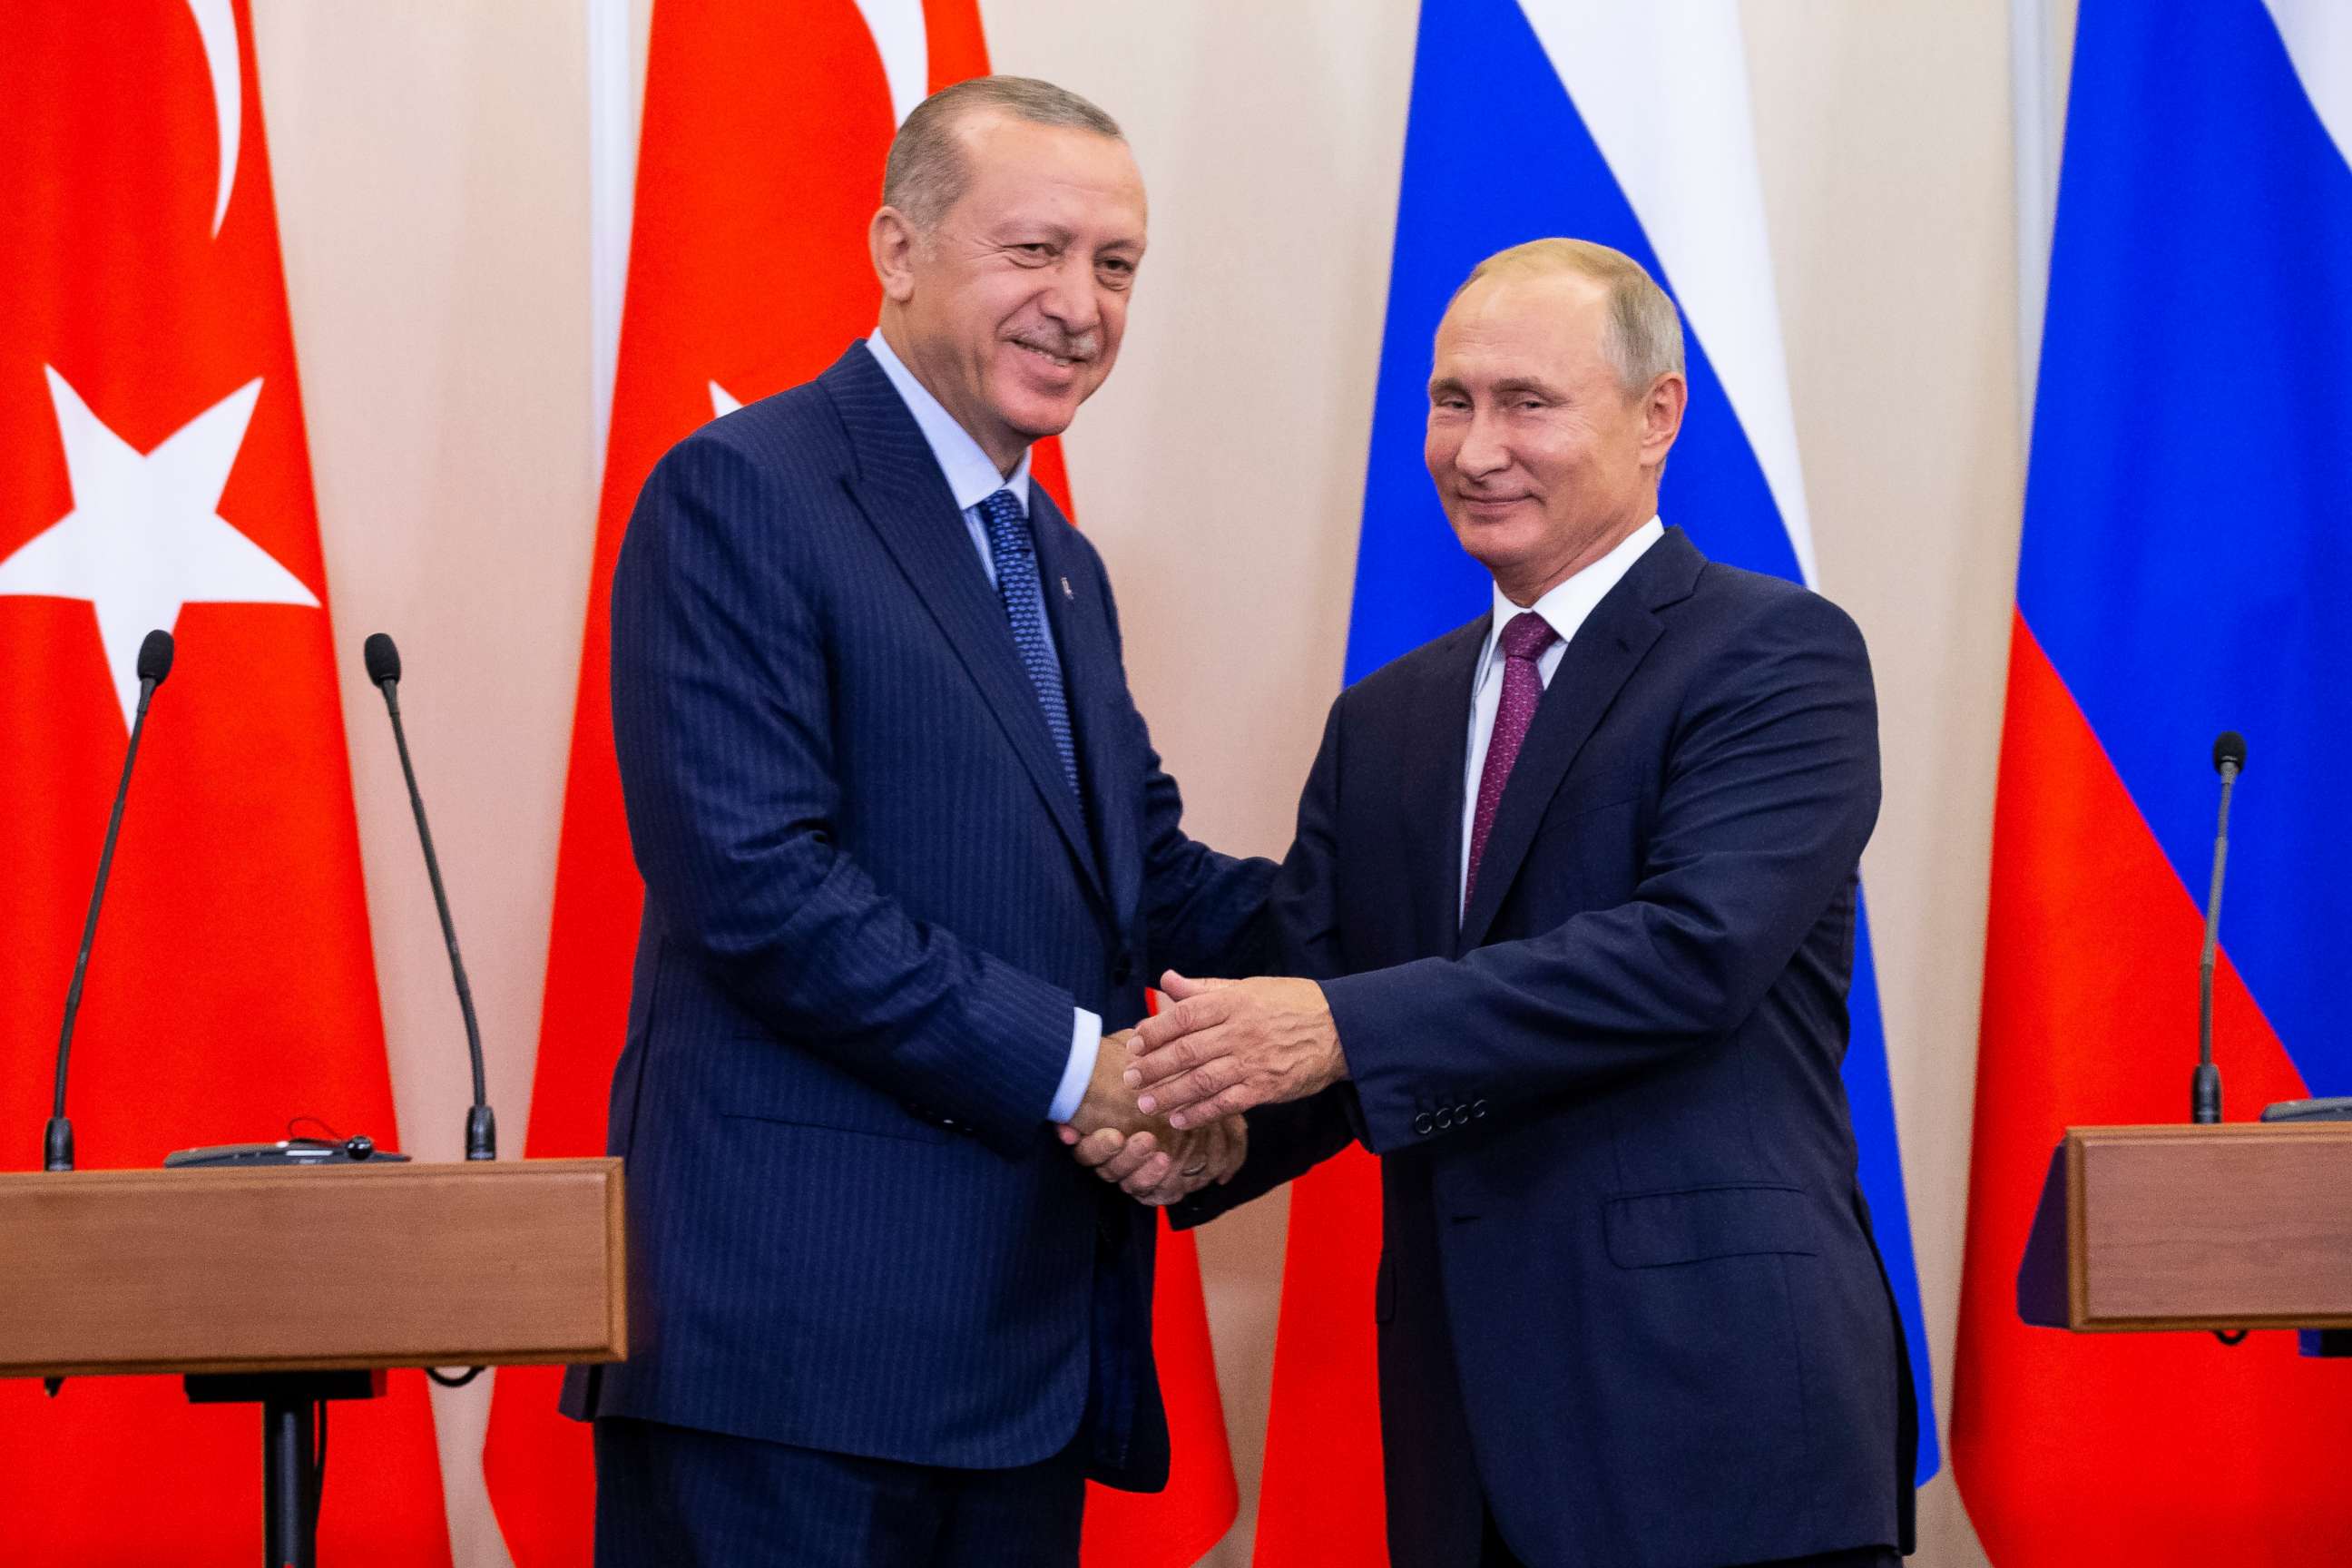 PHOTO: Russian President Vladimir Putin and Turkish President Recep Tayyip Erdogan shake hands after their joint news conference in Sochi, Russia, Sept. 17, 2018.